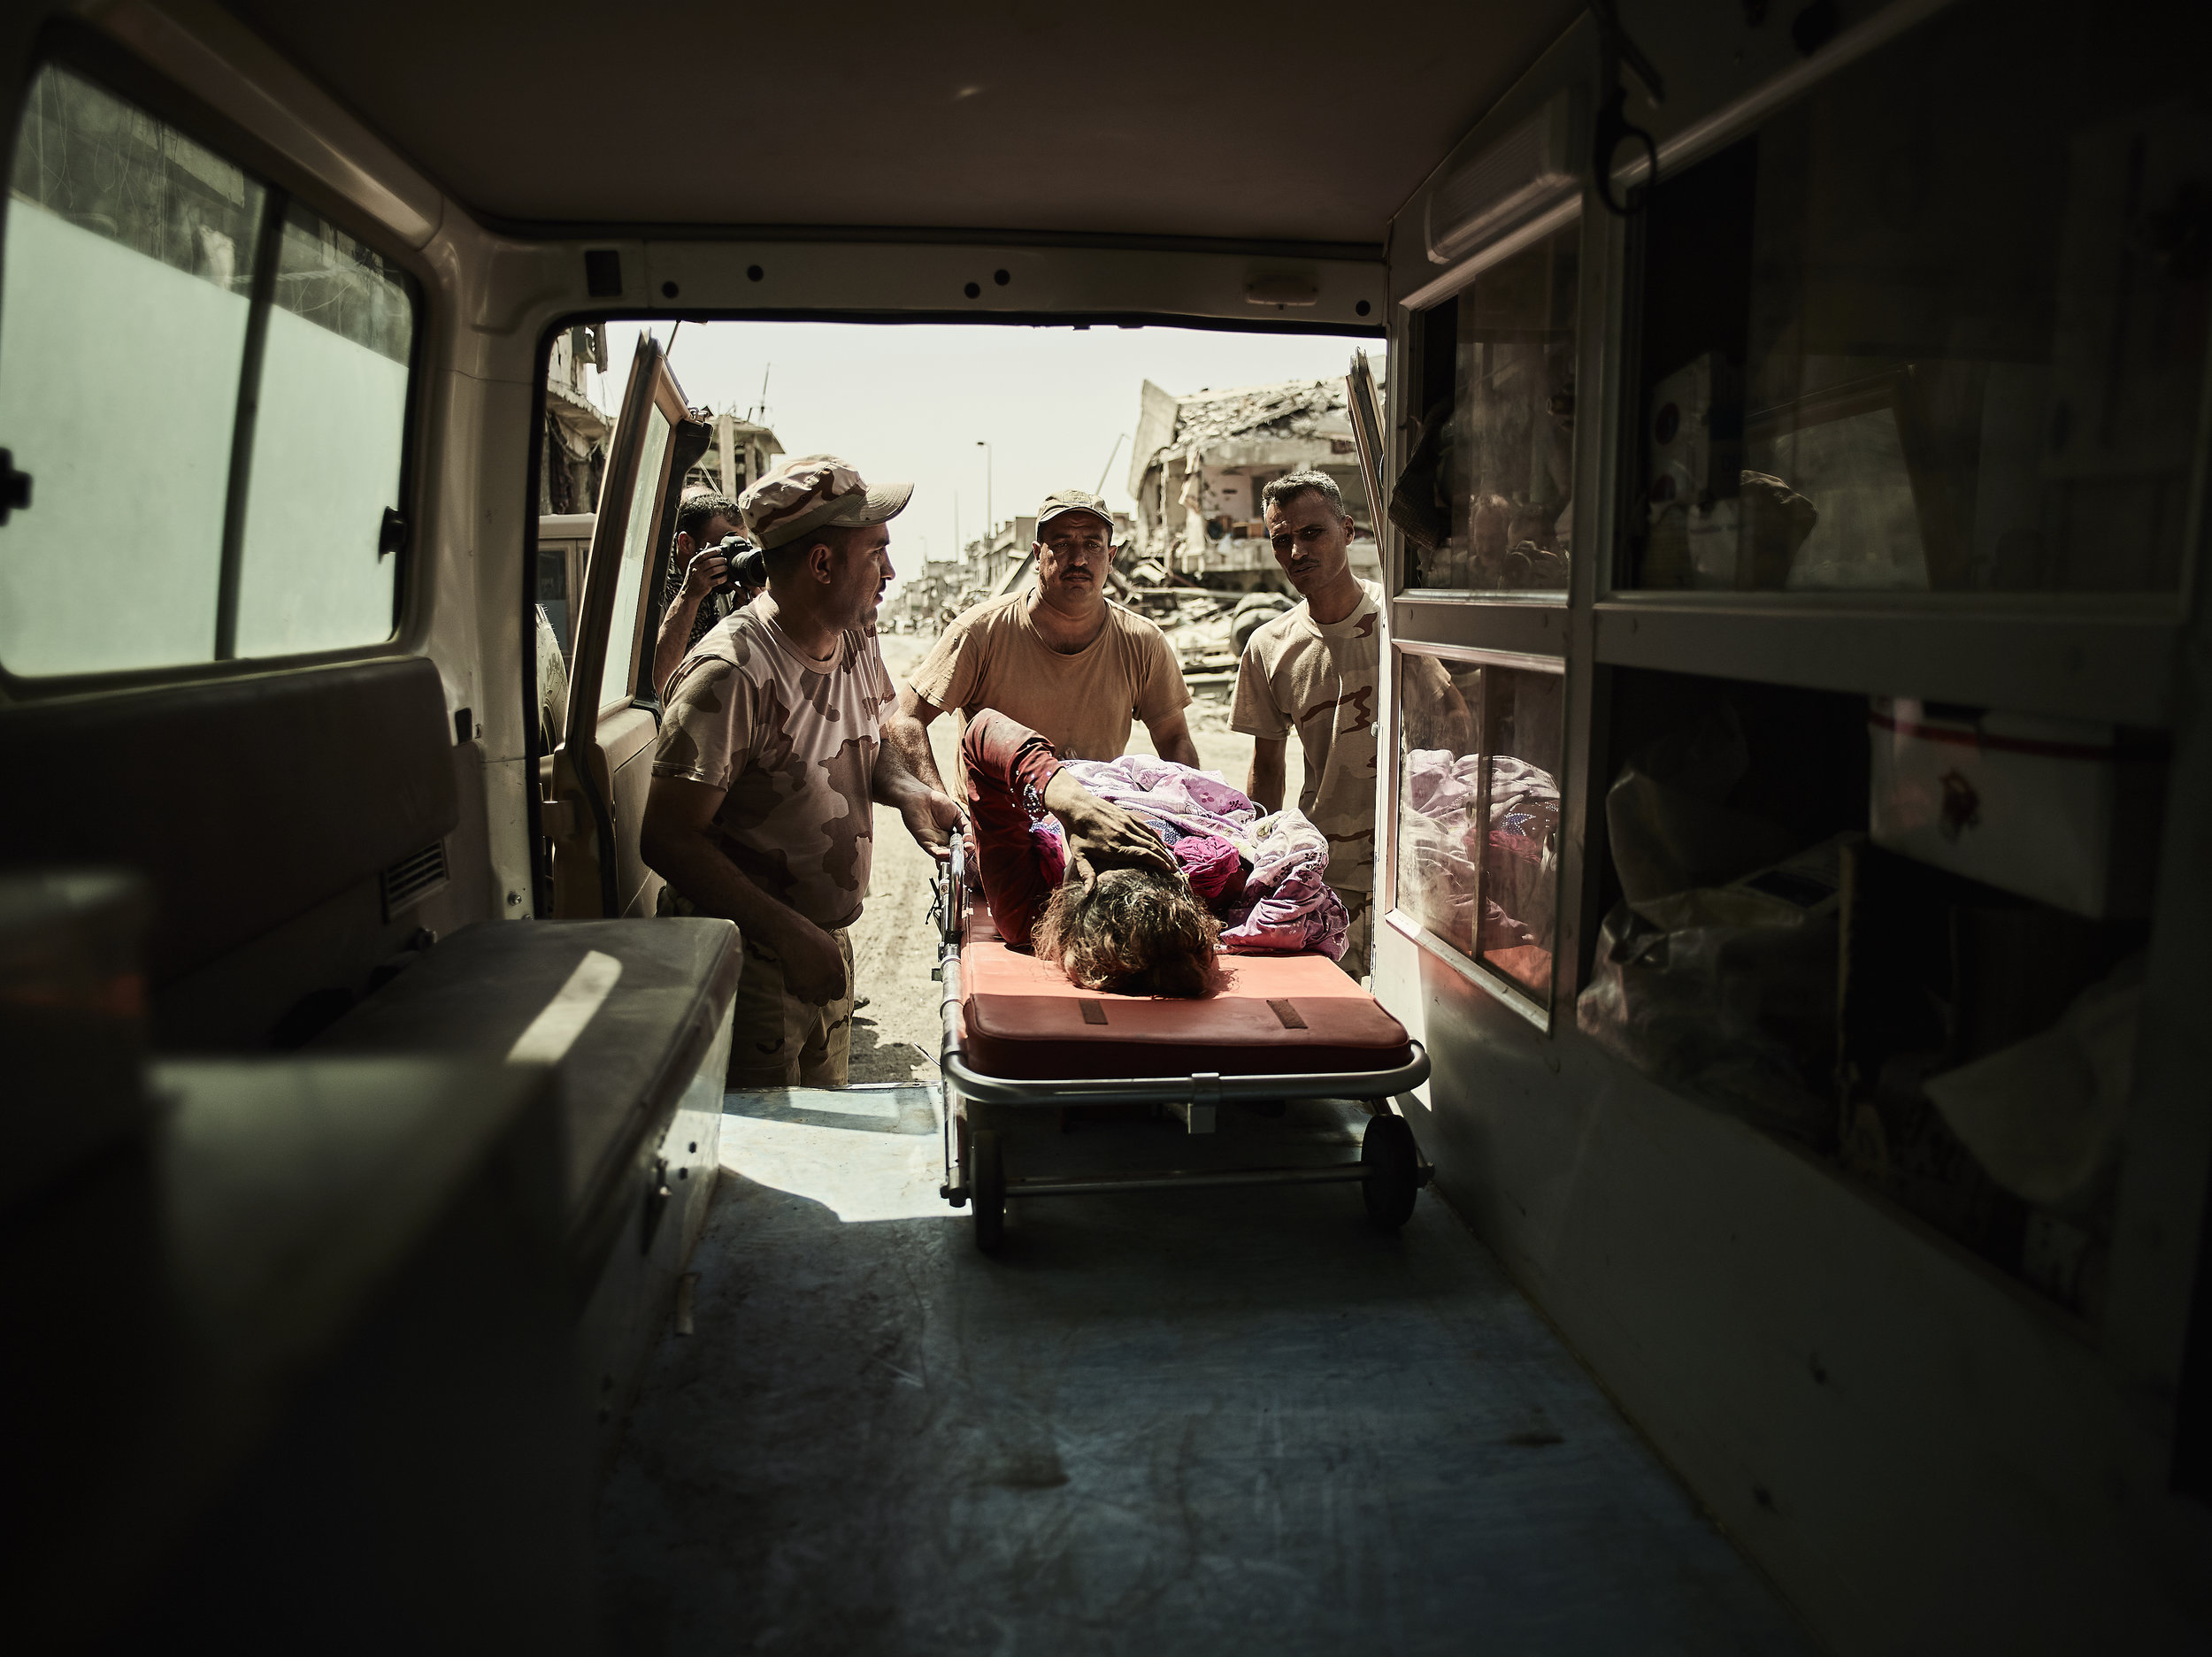 A woman is loaded into an ambulance after being rescued from ISIS, West Mosul